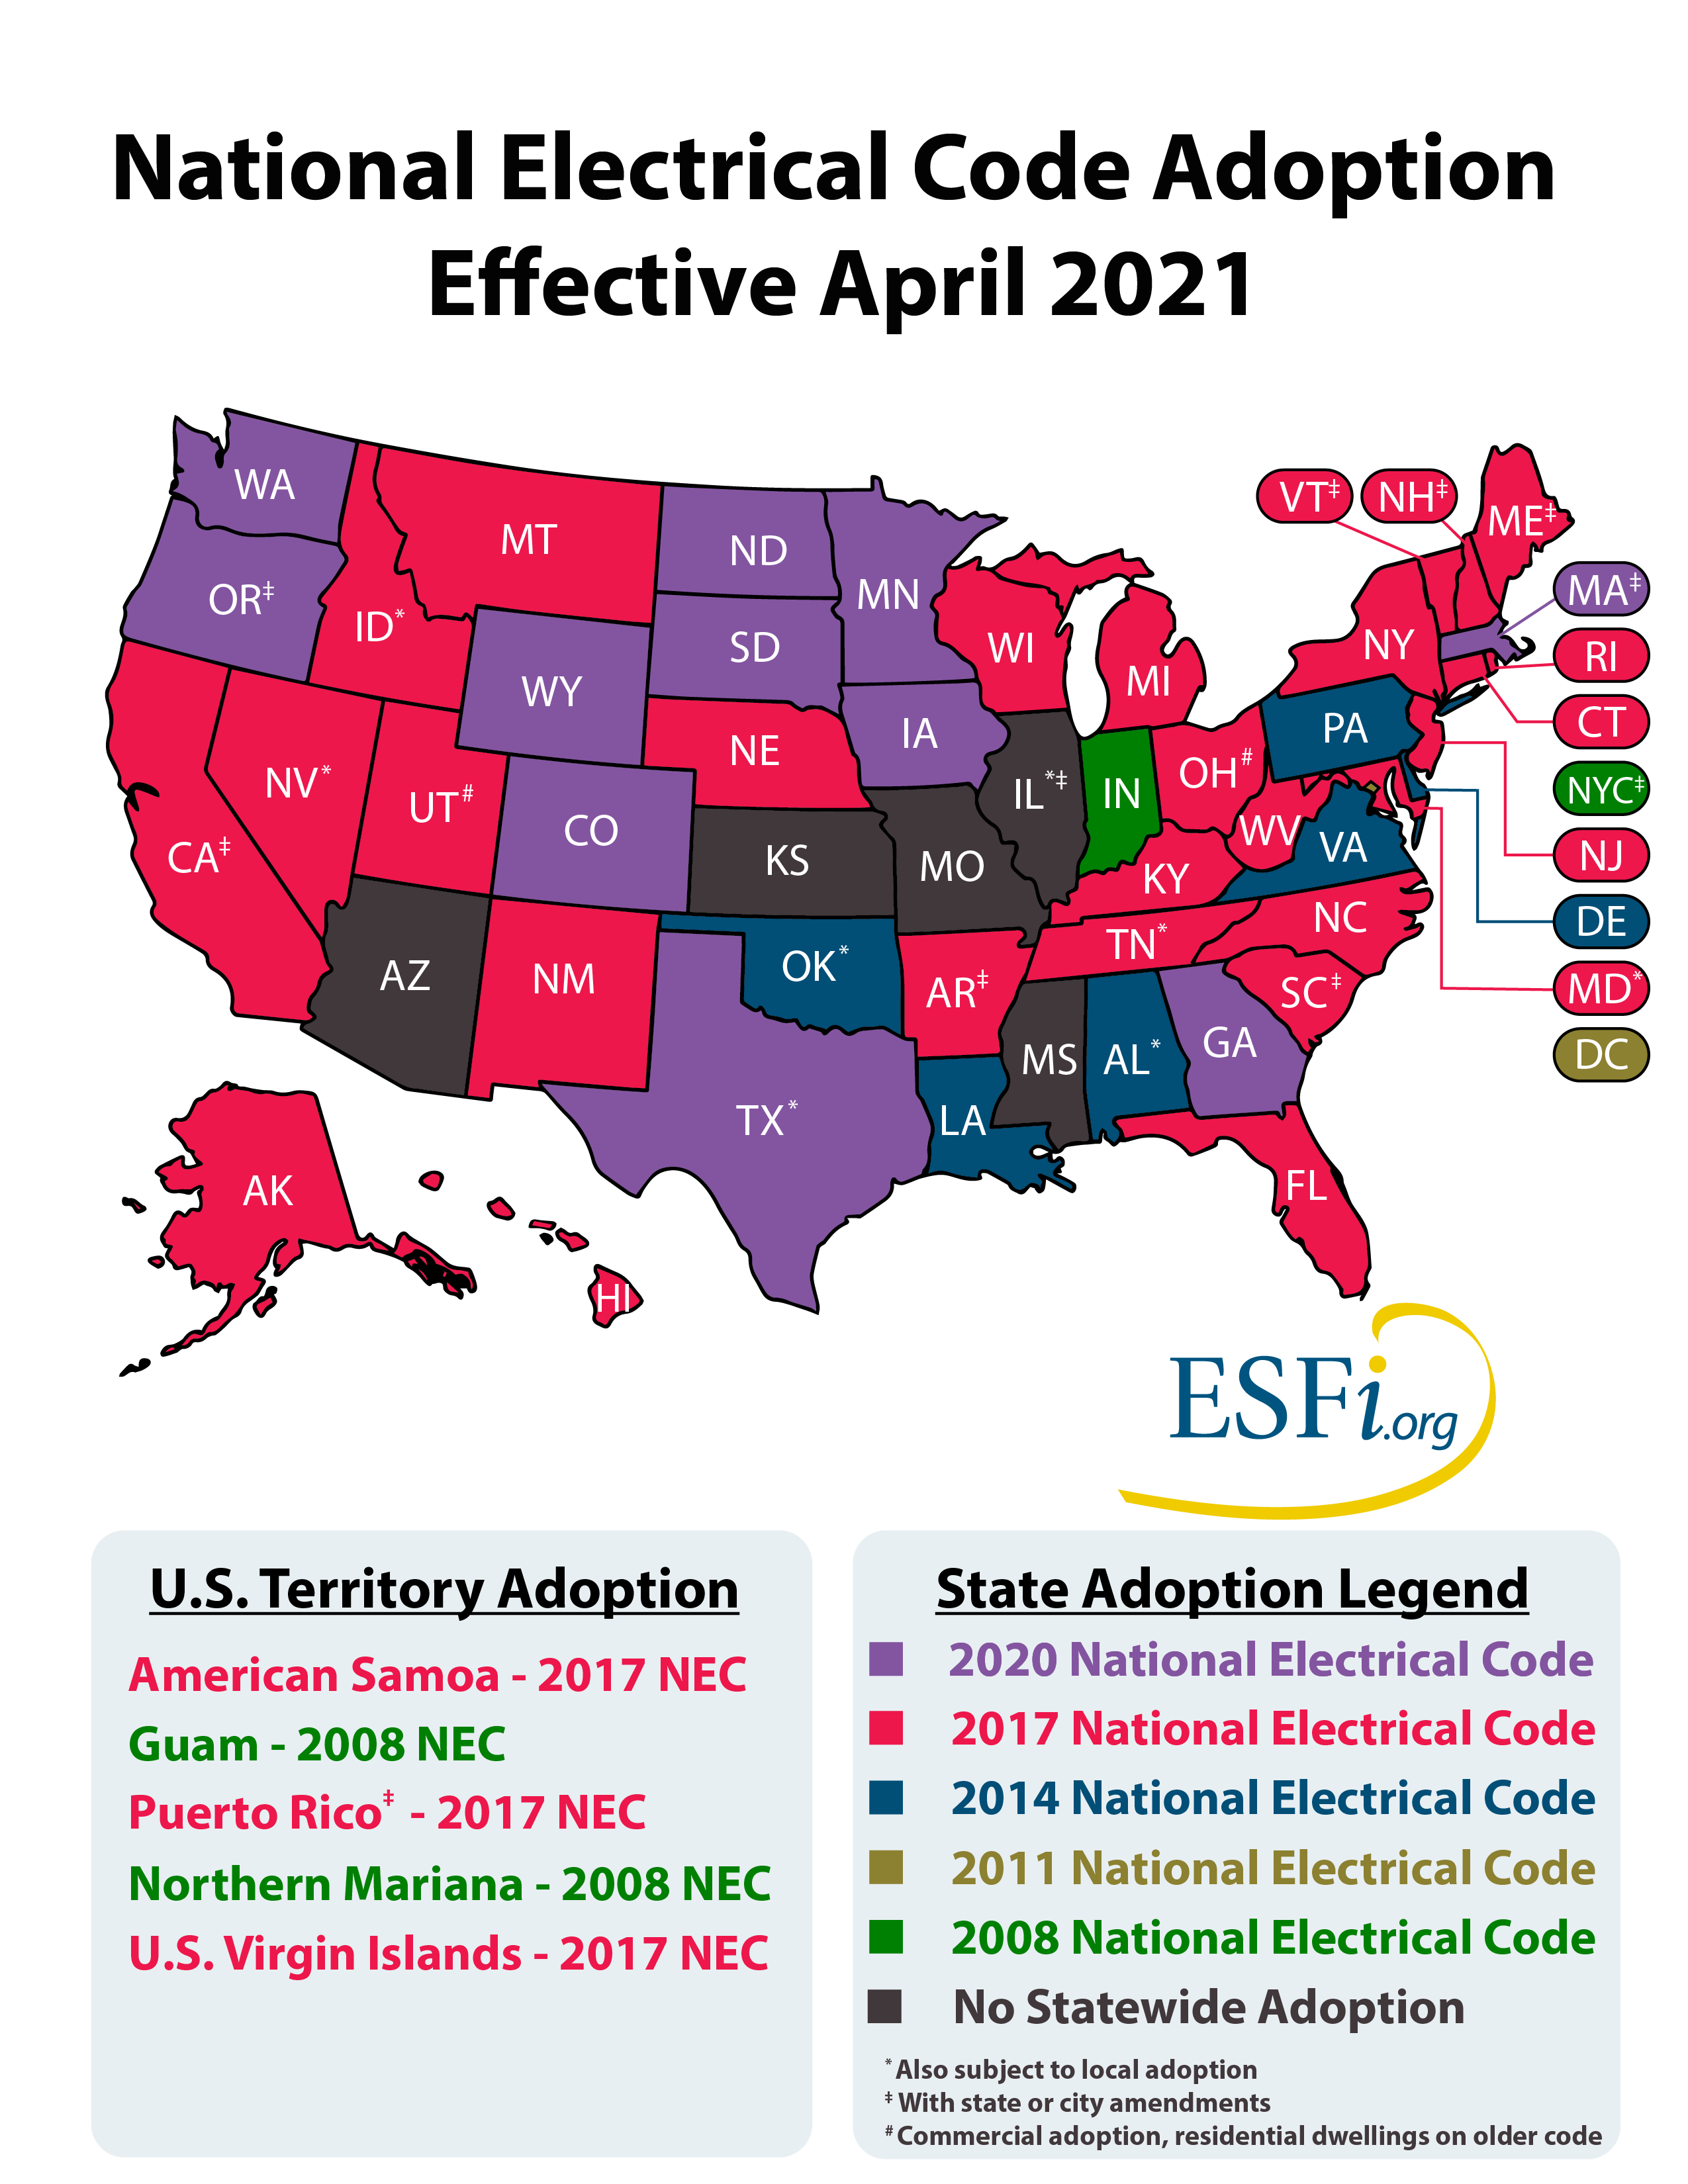 Buy Electrical Code Finder Based on the 2023 National Electrical